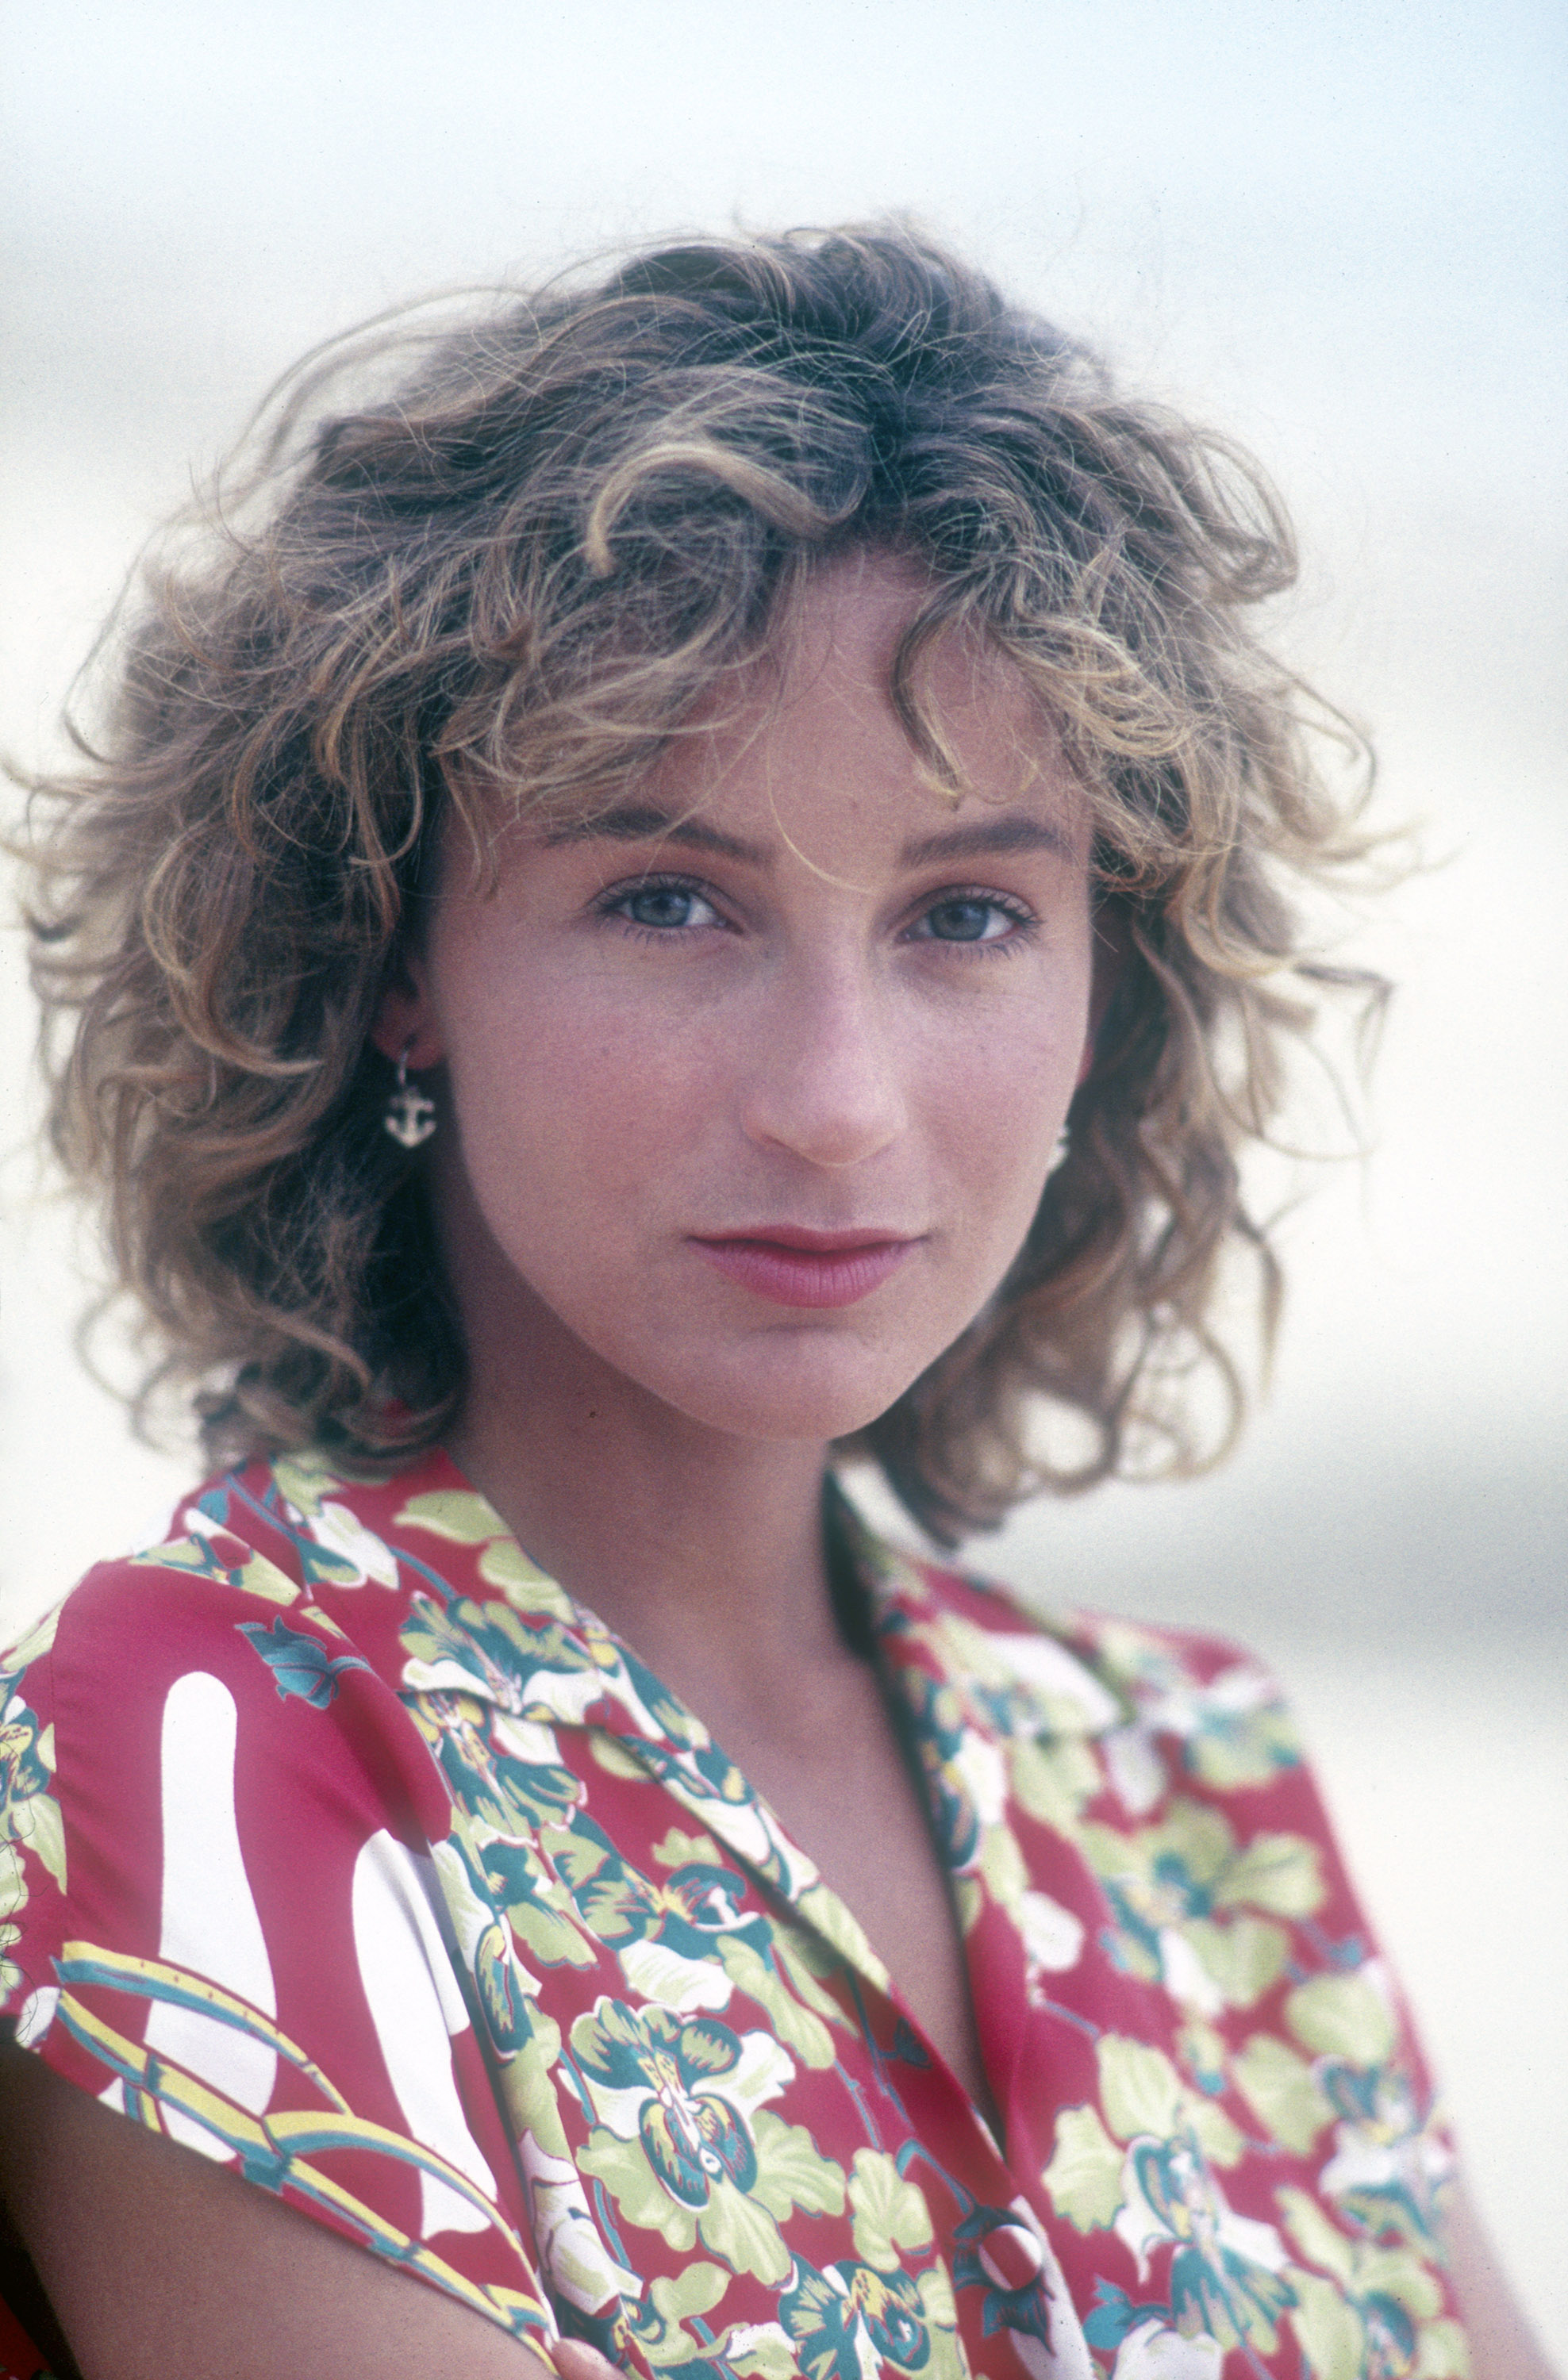 Jennifer Grey in New York City in the 1980s | Source: Getty Images